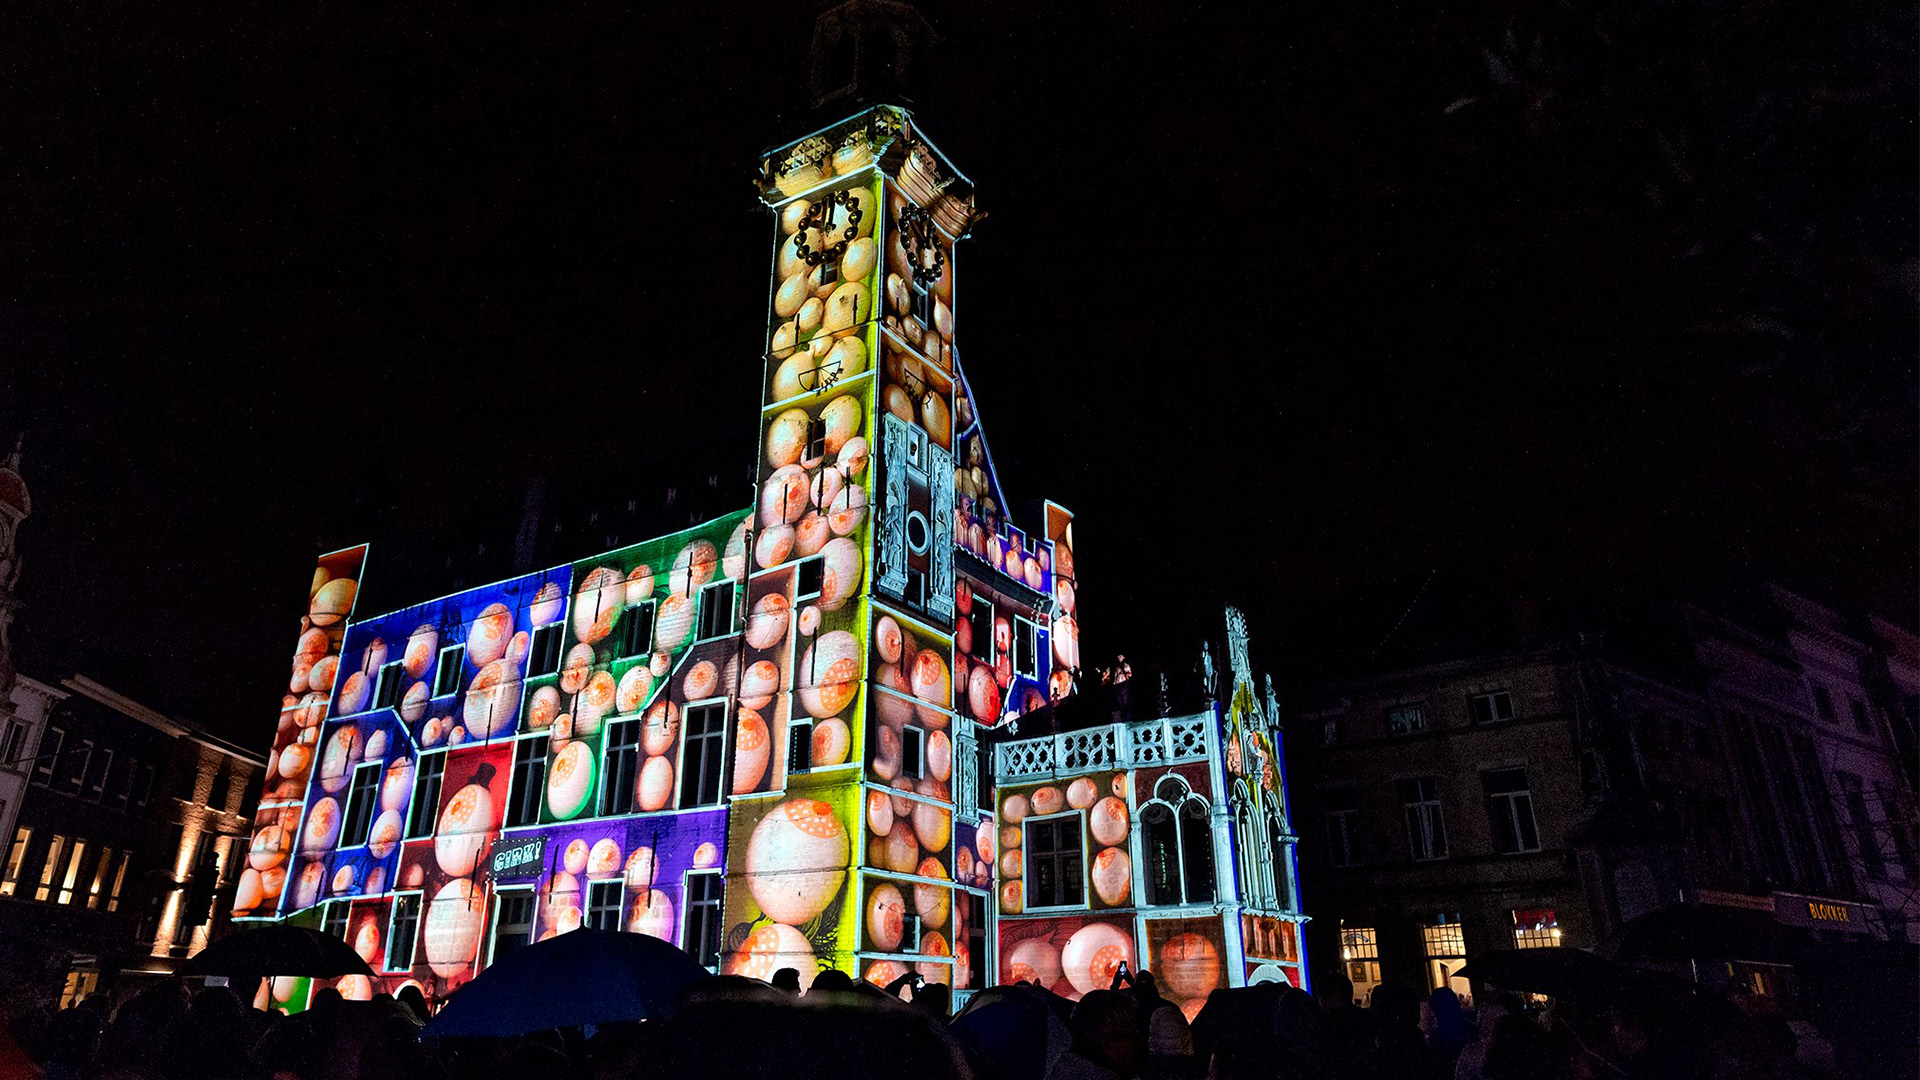 projection mapping for stad aalst by lion beach cirk